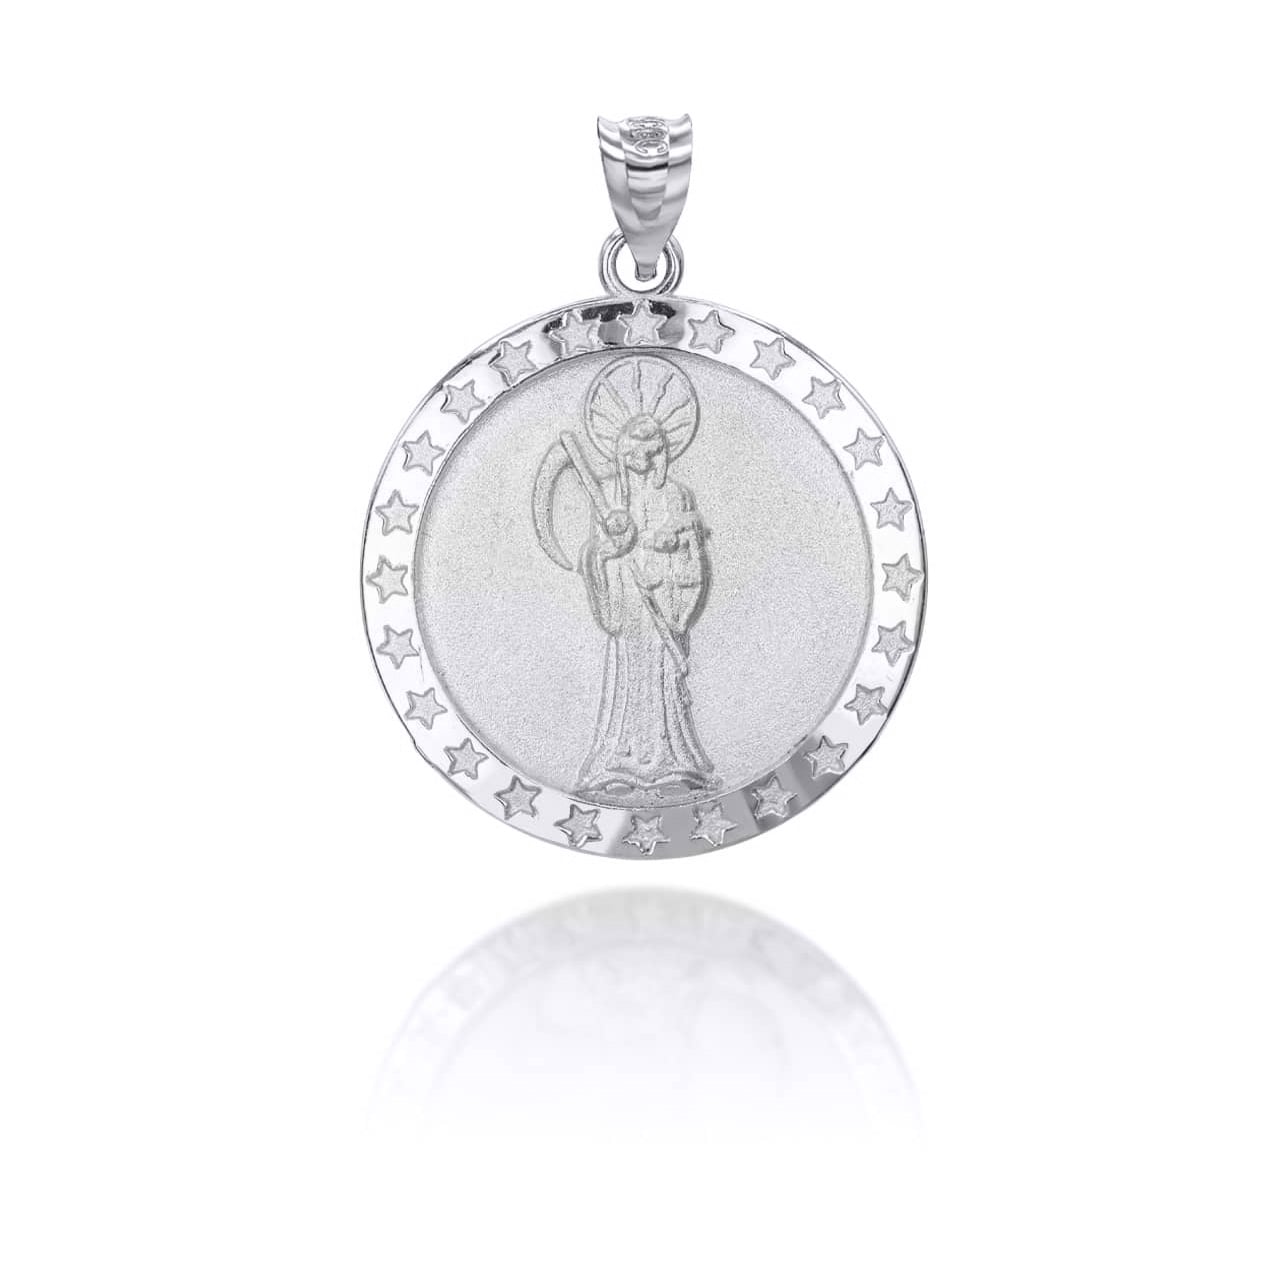 Religious Pendants - The Saint Christopher Protect US Oval Sterling Silver Pendant Necklace Gold M | Factory Direct Jewelry